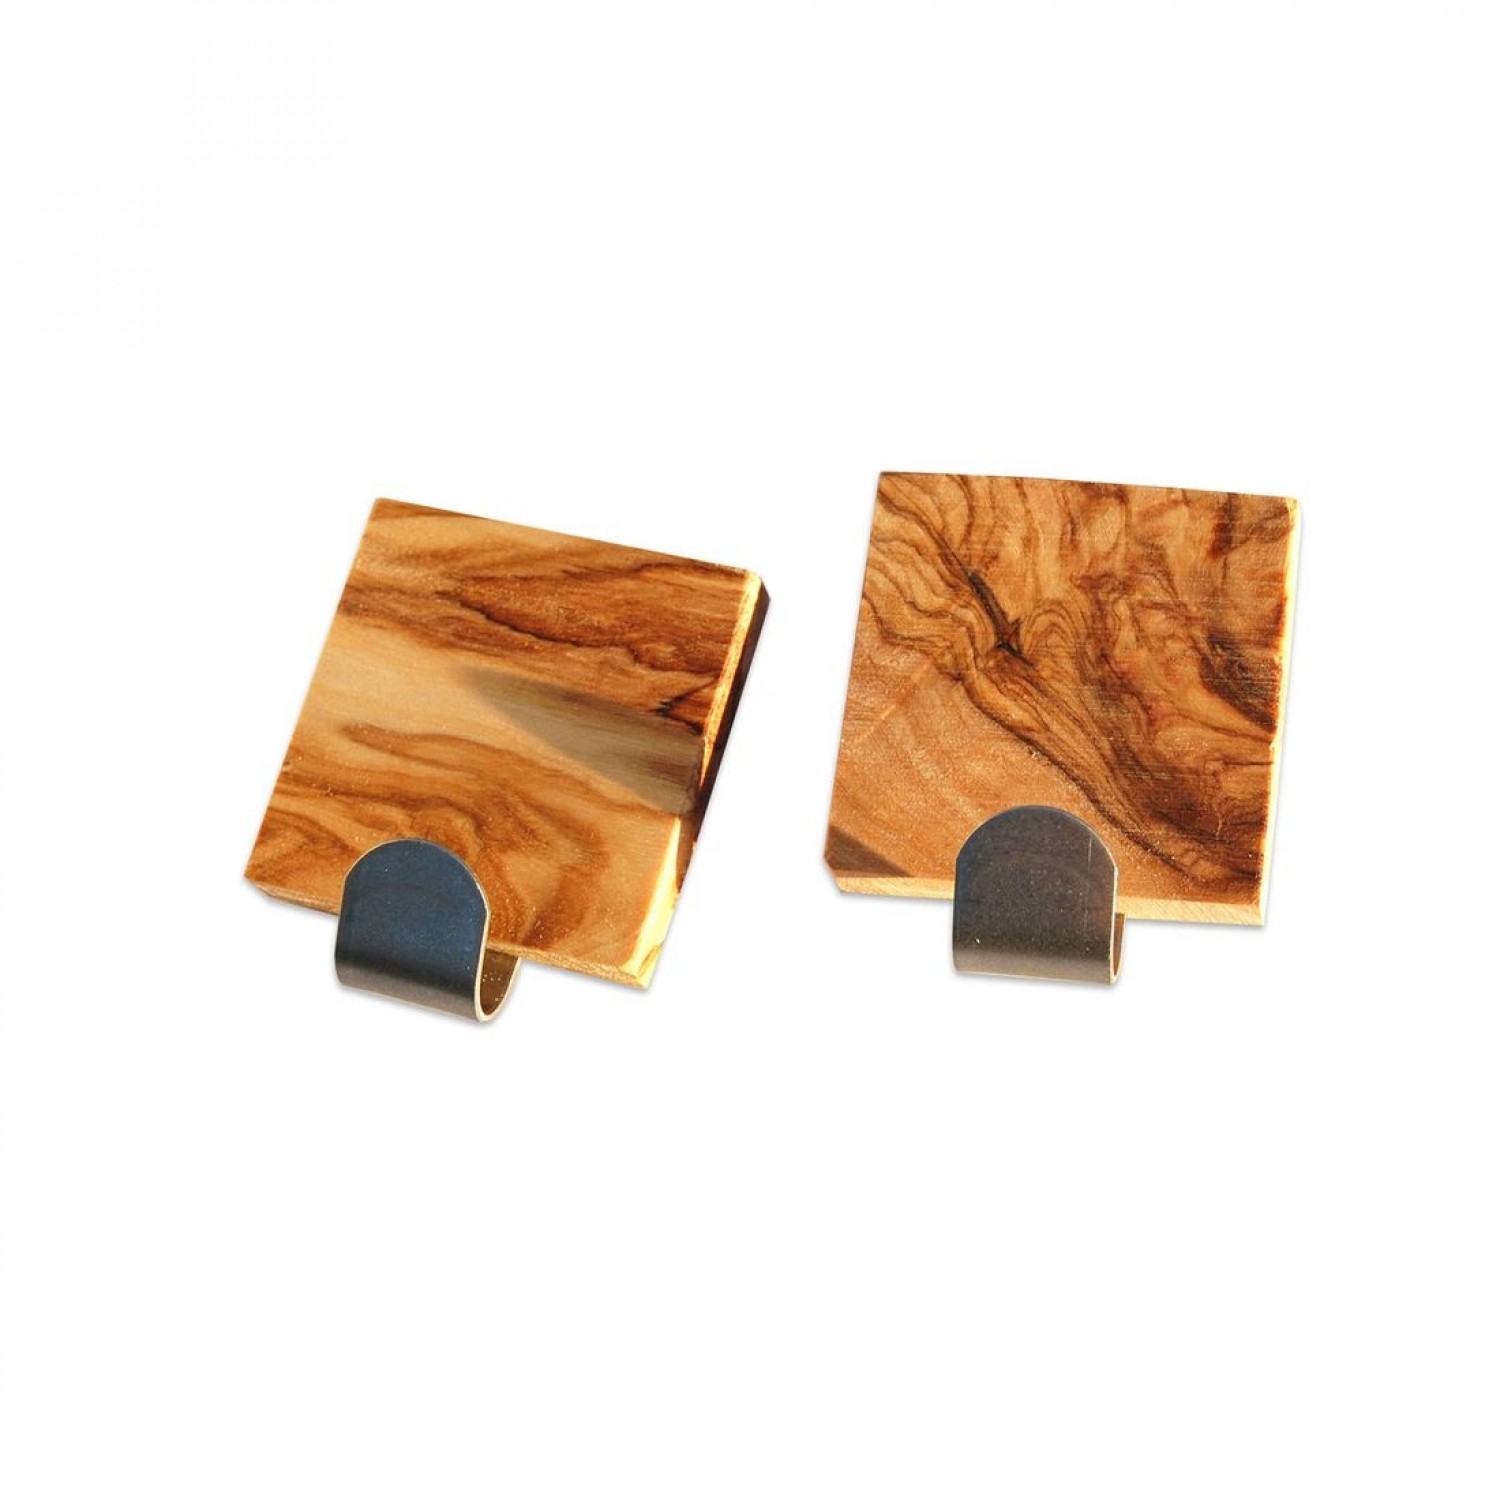 Self-Adhesive Hook Olive Wood, without motif, set of 2 » D.O.M.